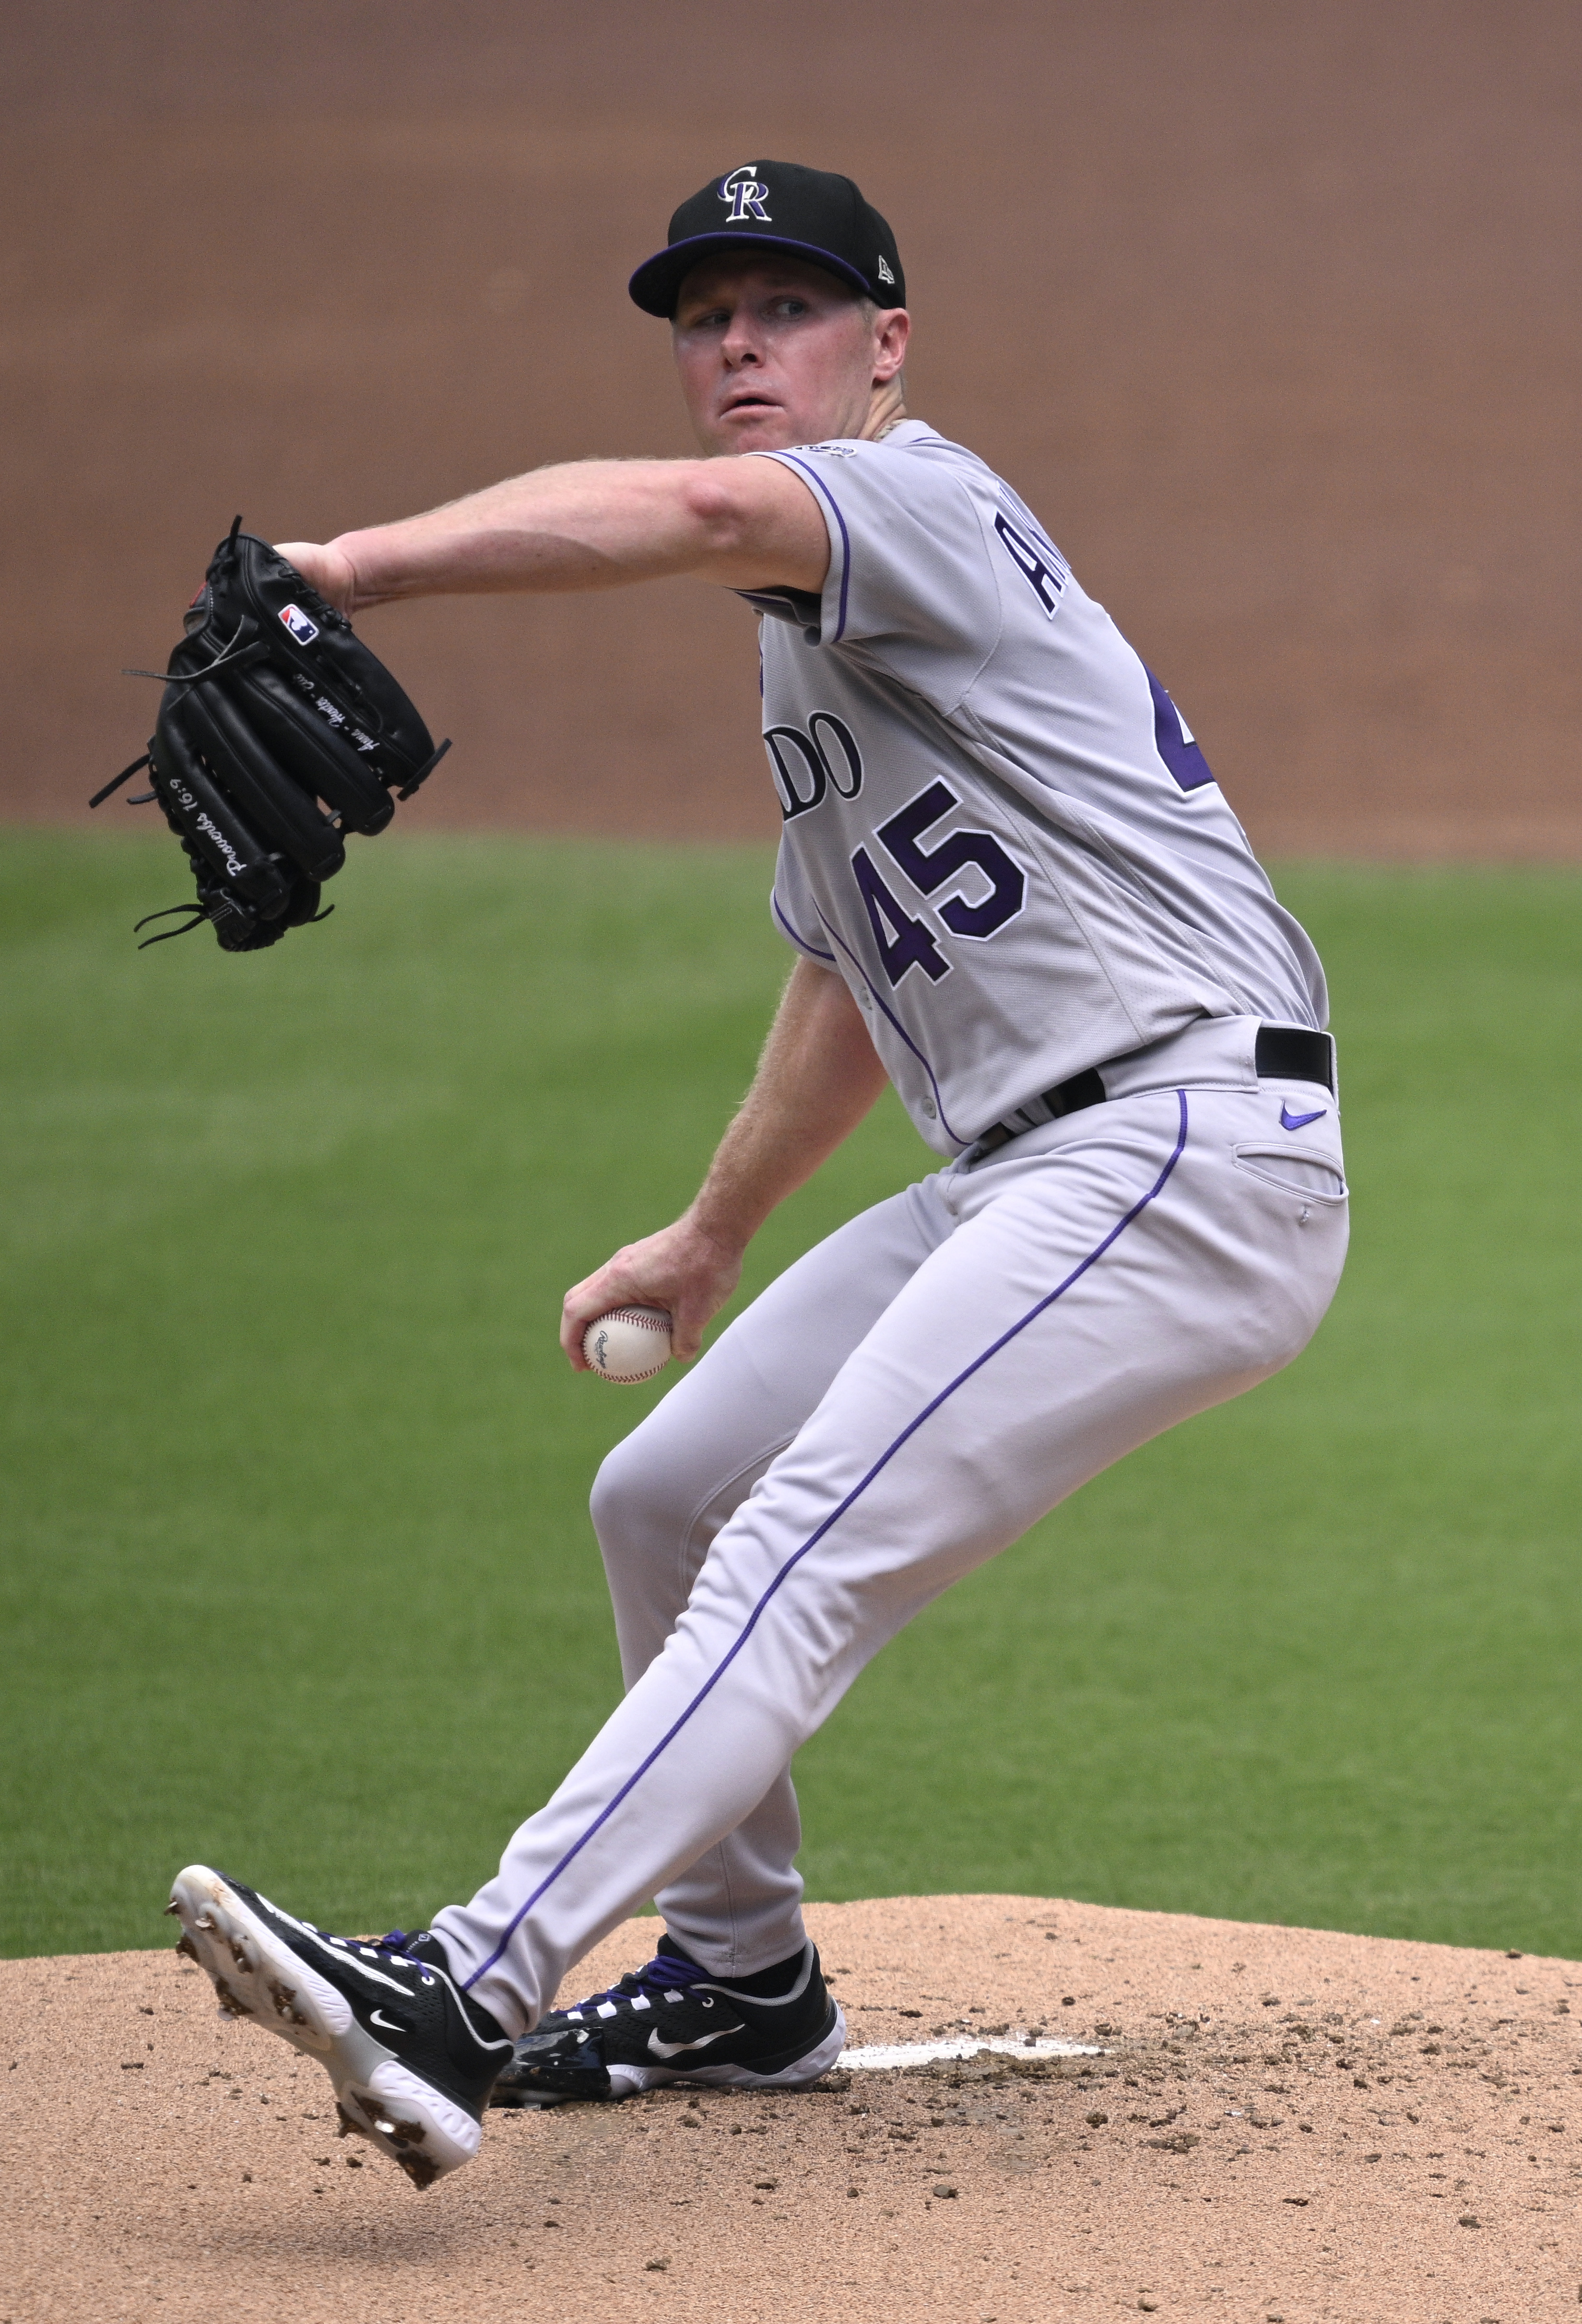 Rockies fall to Padres in run-happy Father's Day defeat – The Denver Post